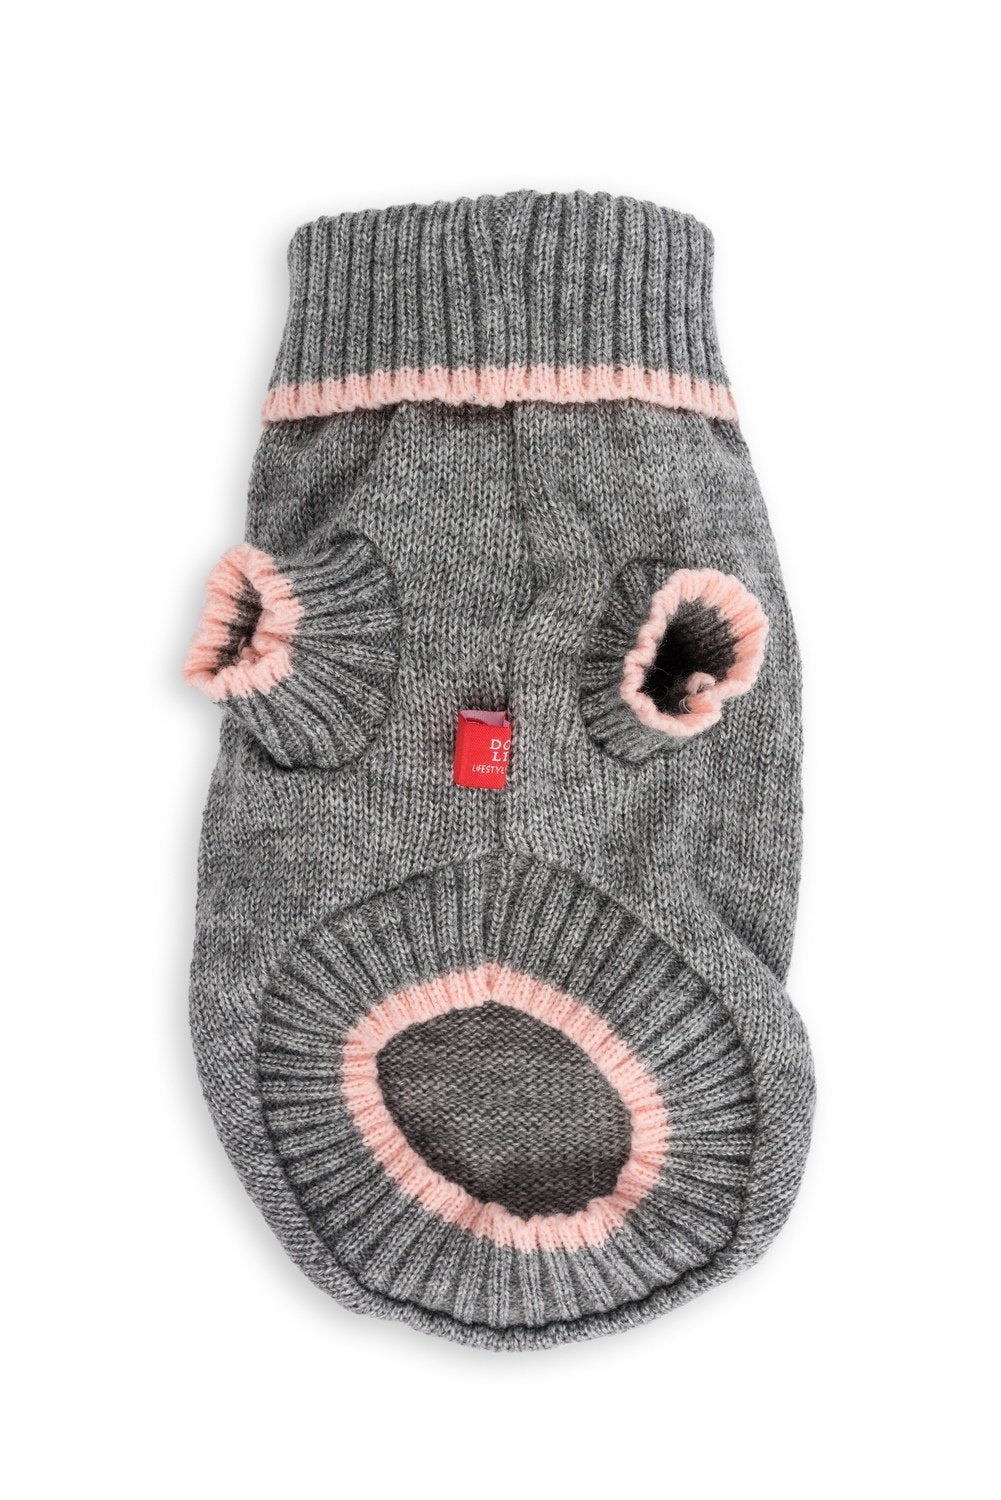 Dog's Life Mohair Knit Poloneck Grey with Pink Trim - Clothing